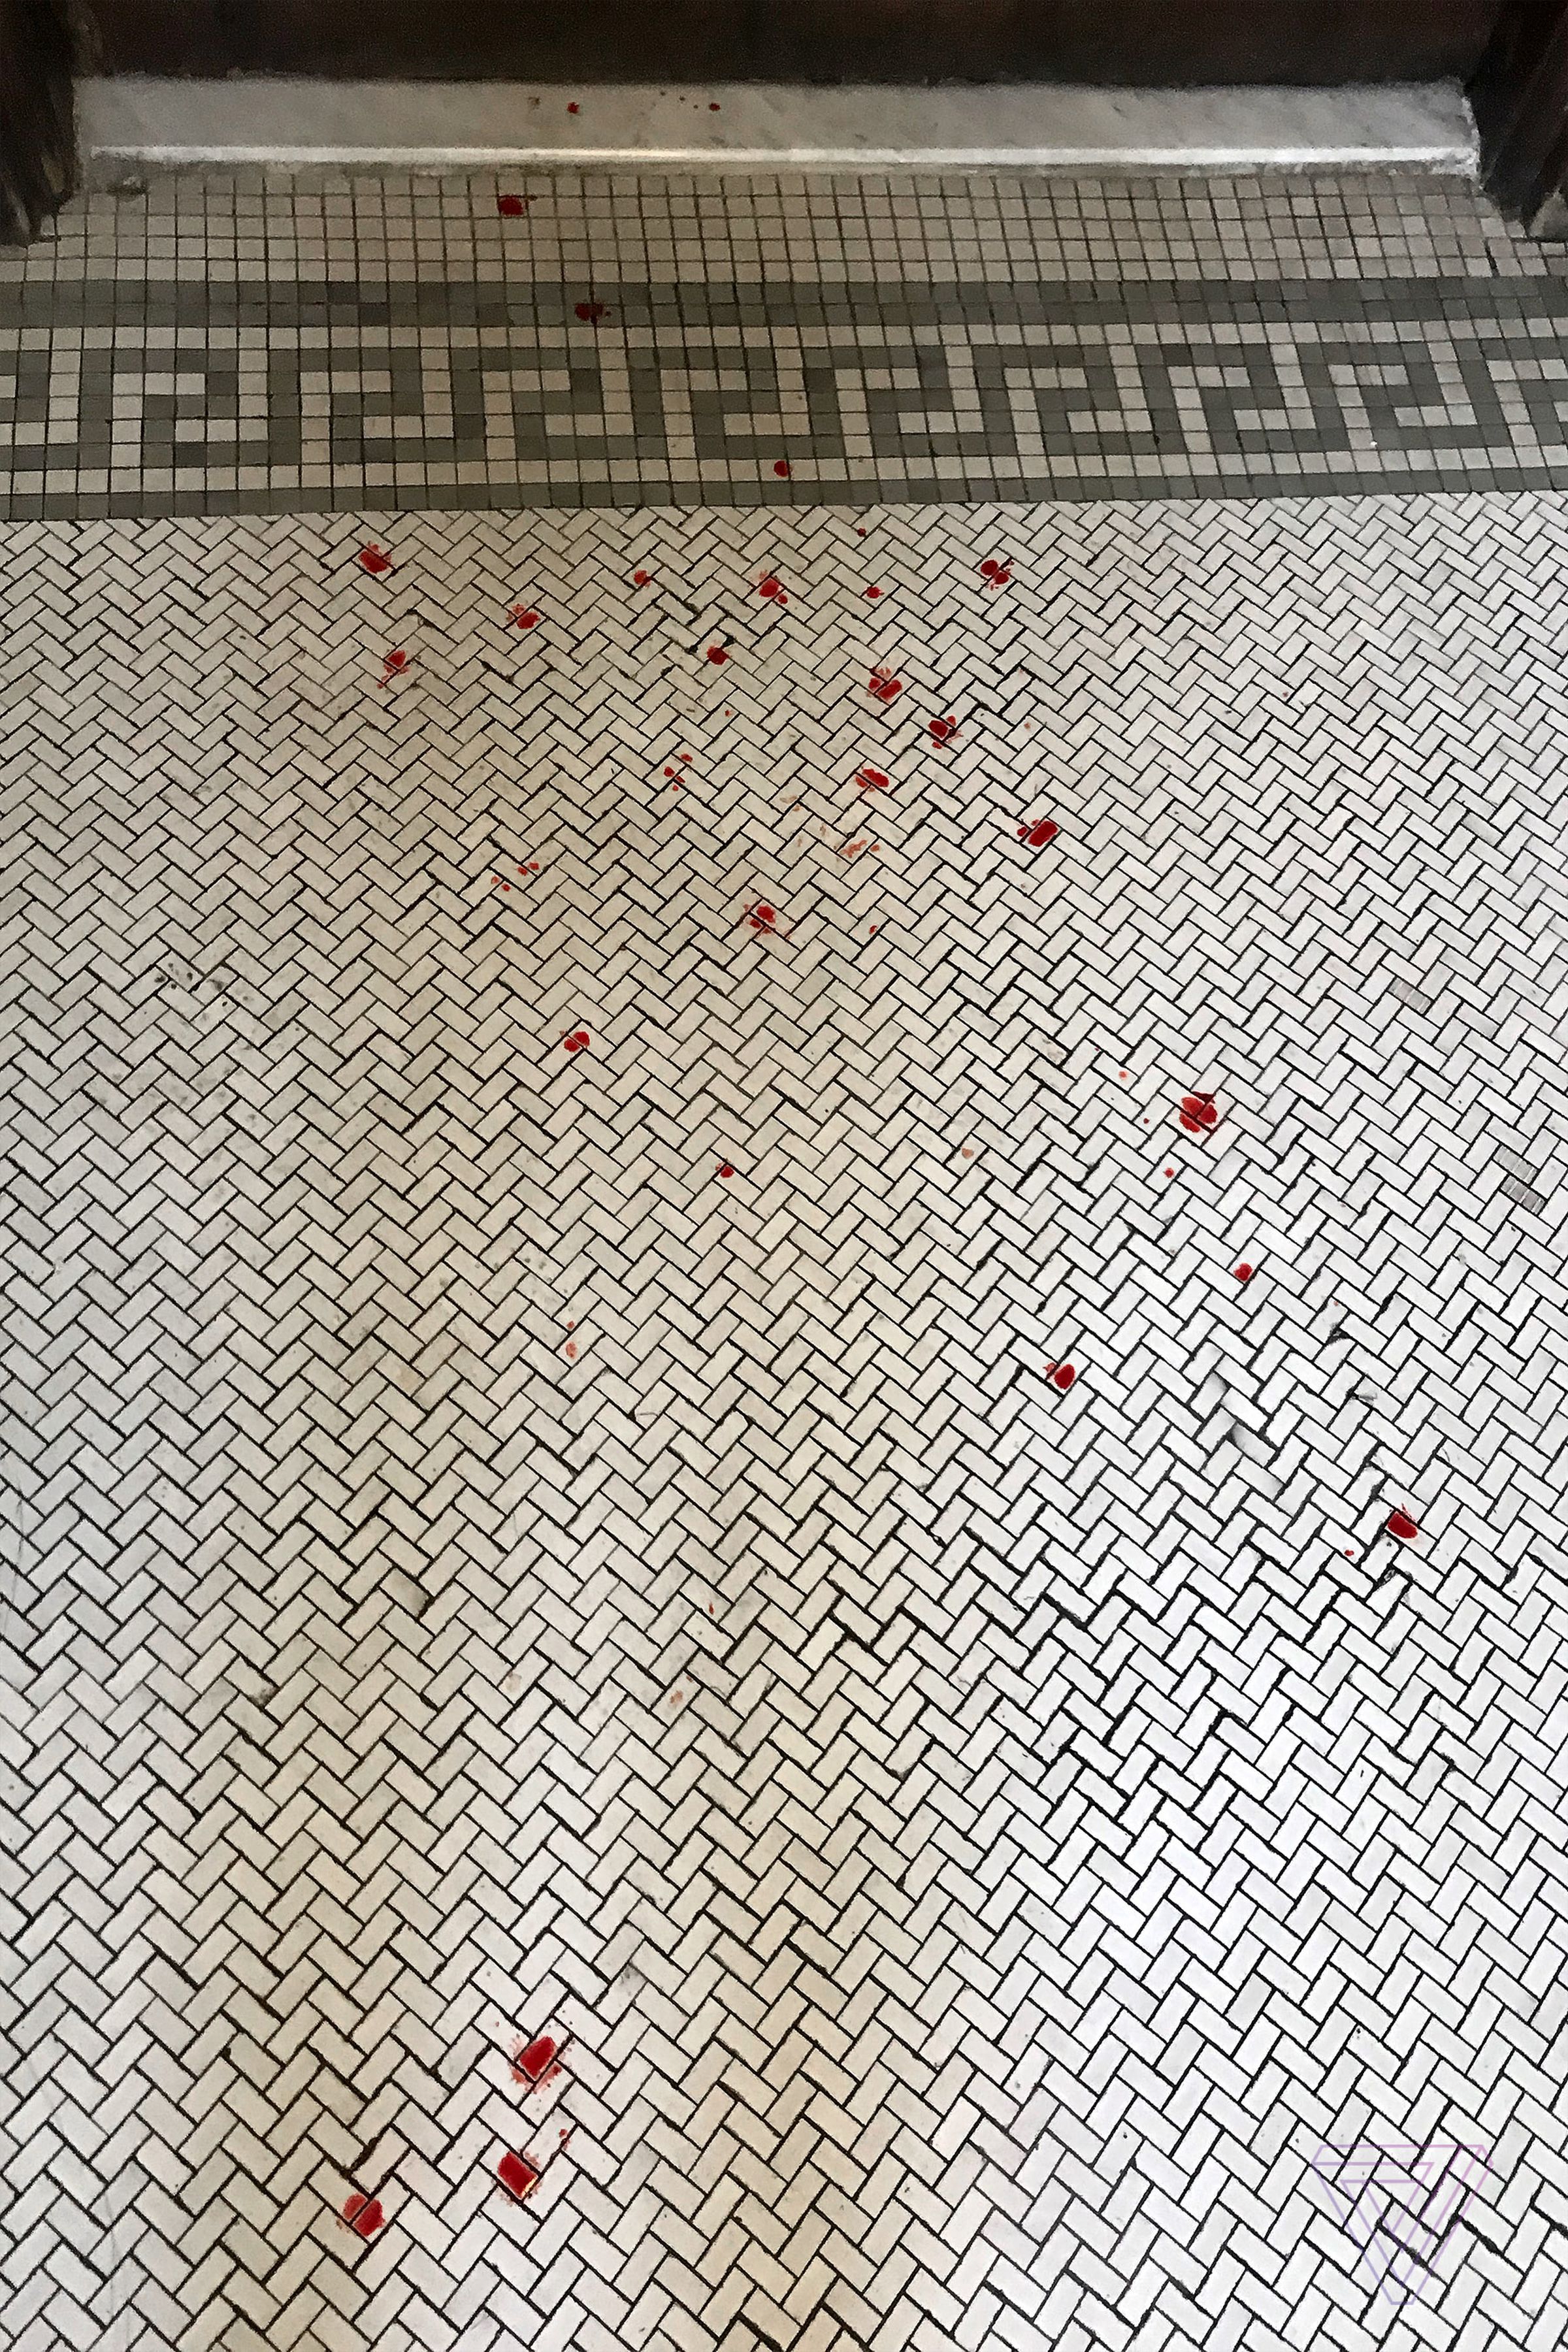 The blood spattered floor in my building’s lobby